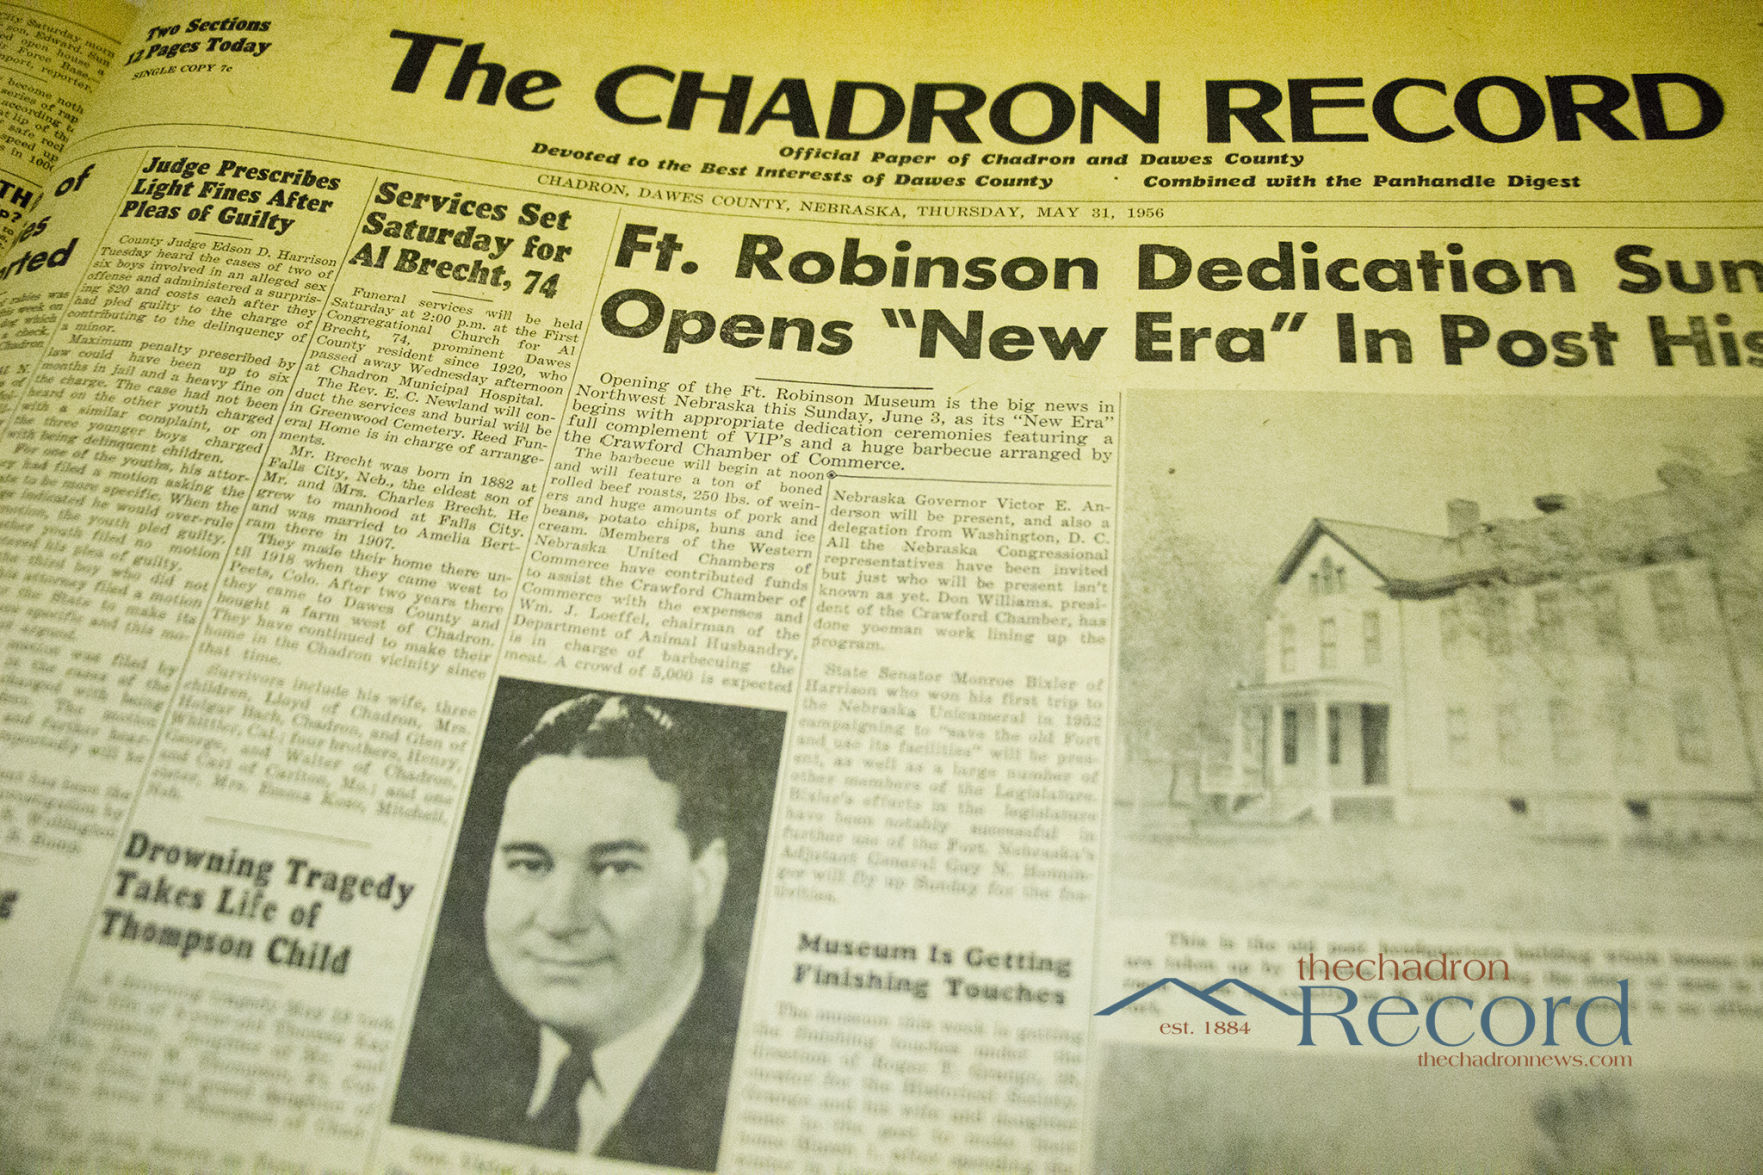 From the Archives - The Chadron Record image